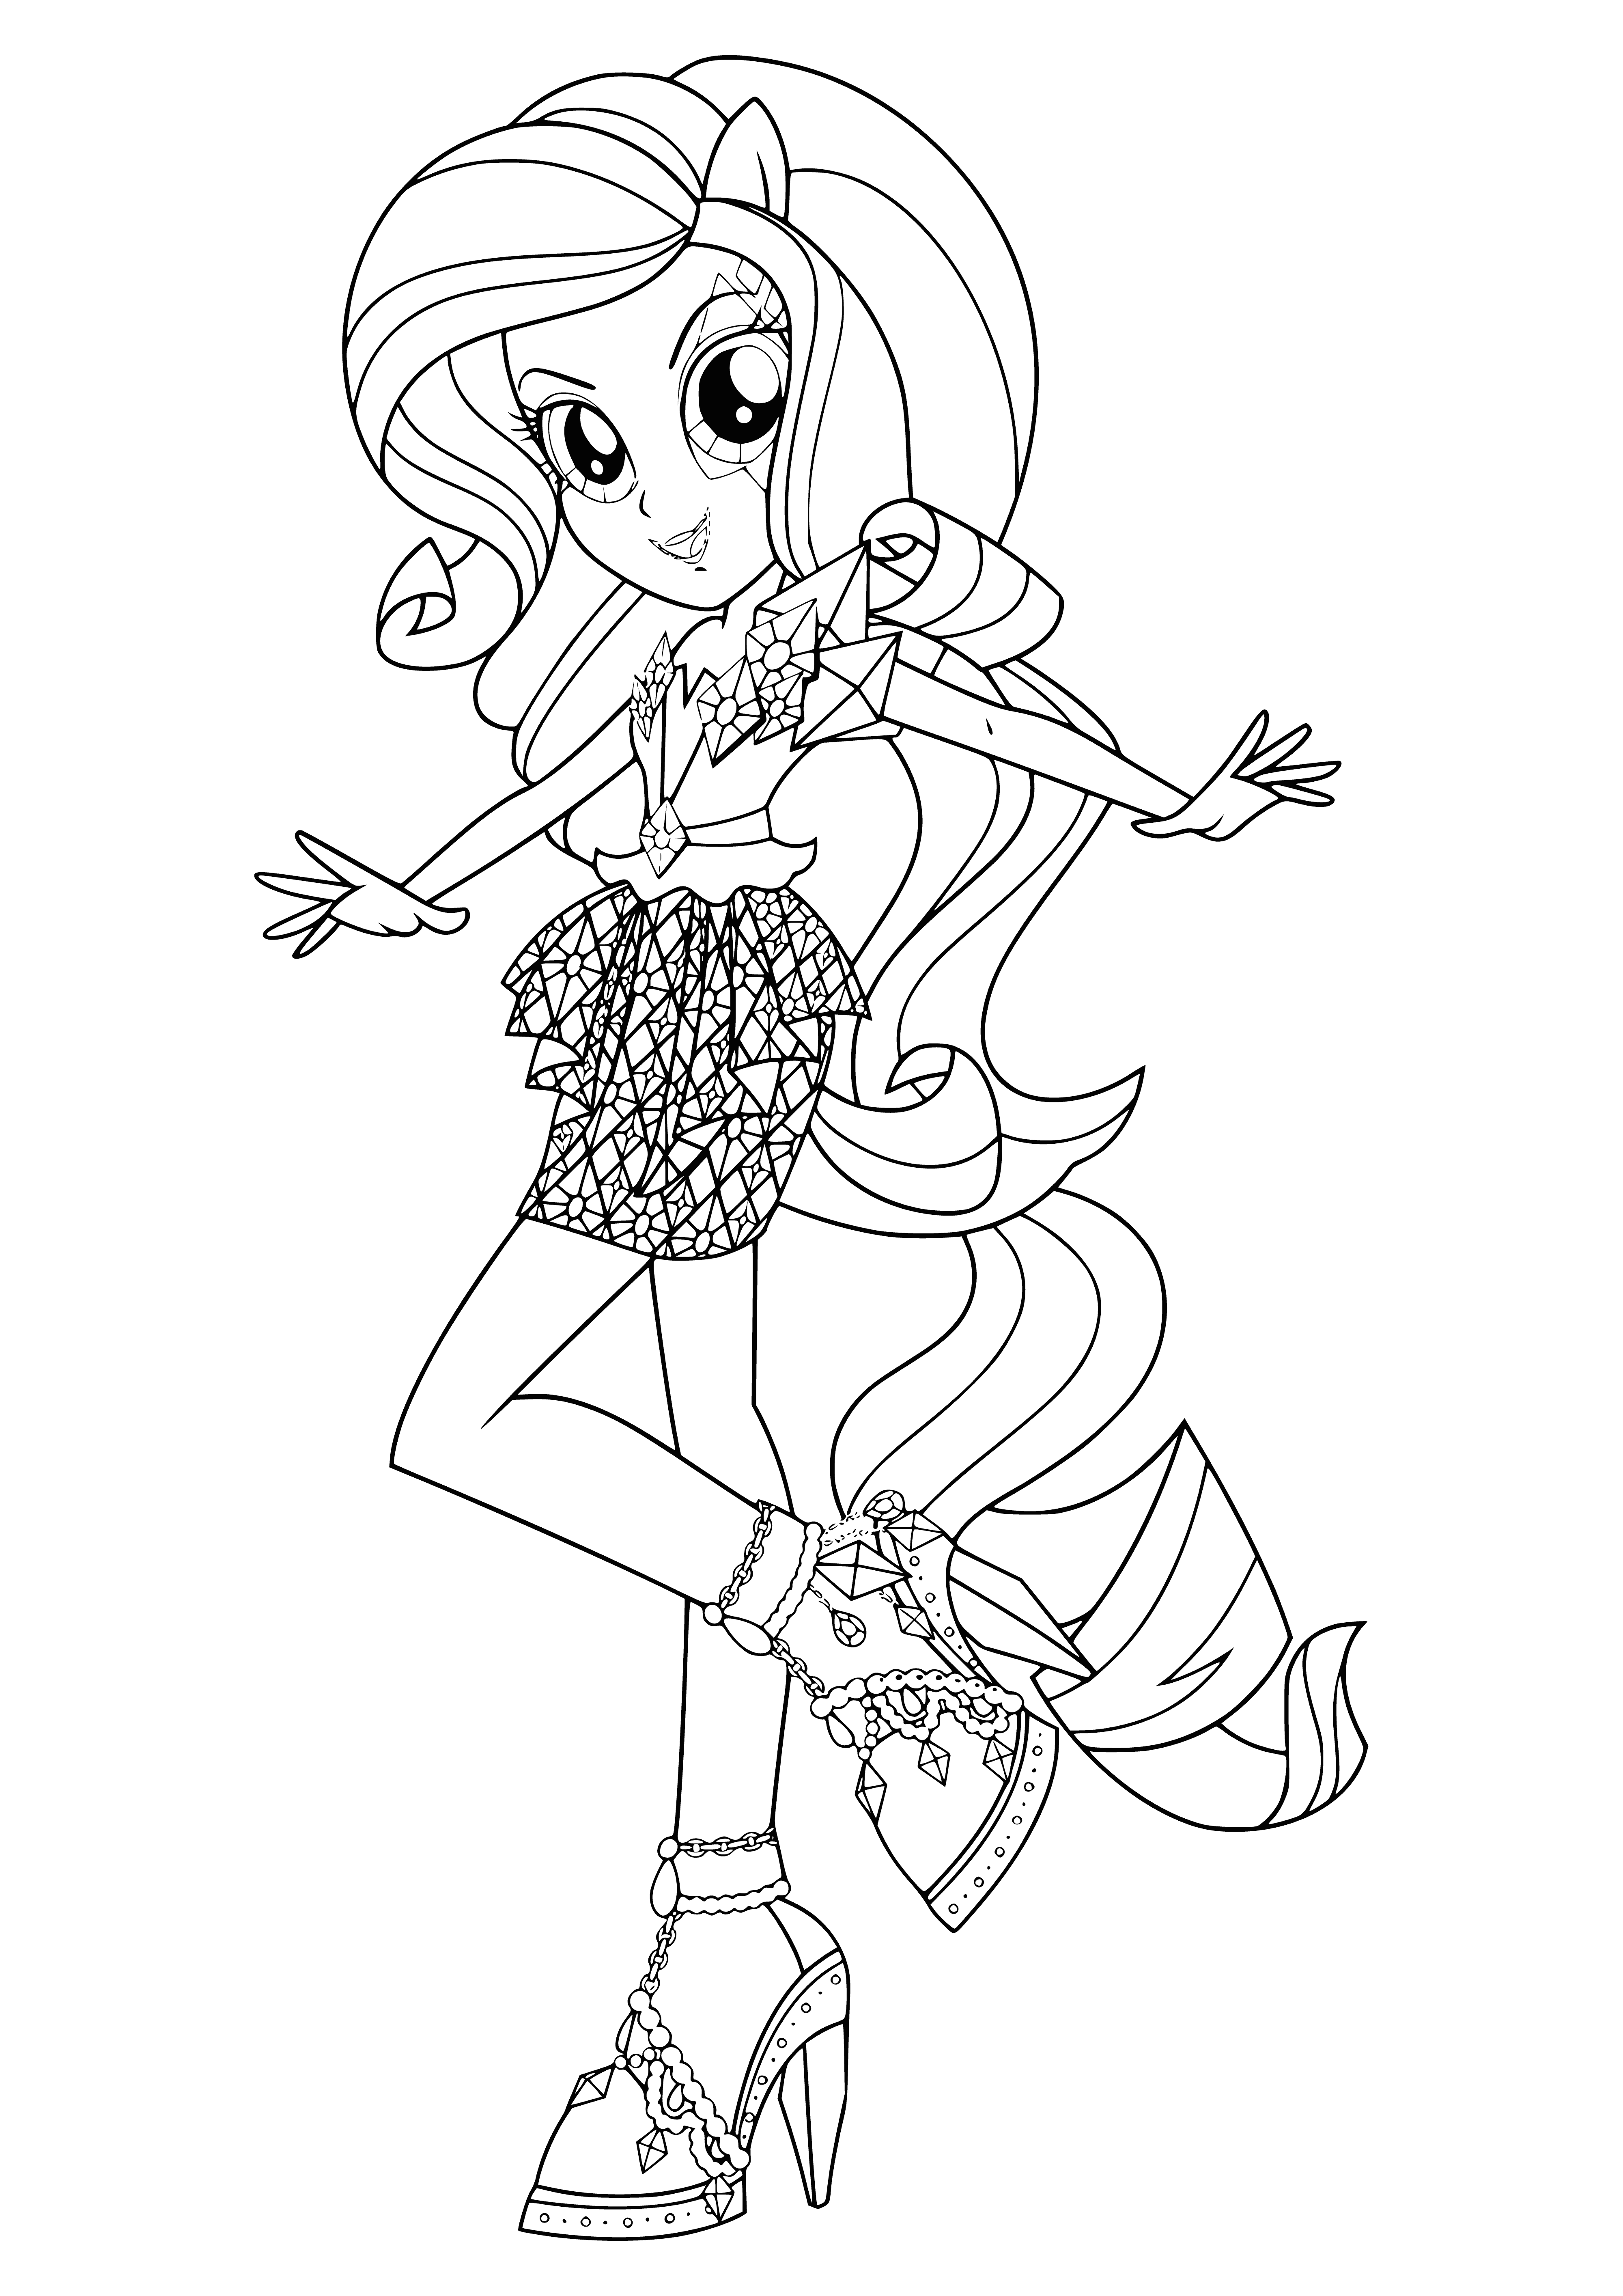 coloring page: Rarity stuns crowd in pink dress w/ sequined bodice, tulle skirt, side pony & pink ribbon. She holds mic, looks to left, awaiting applause.